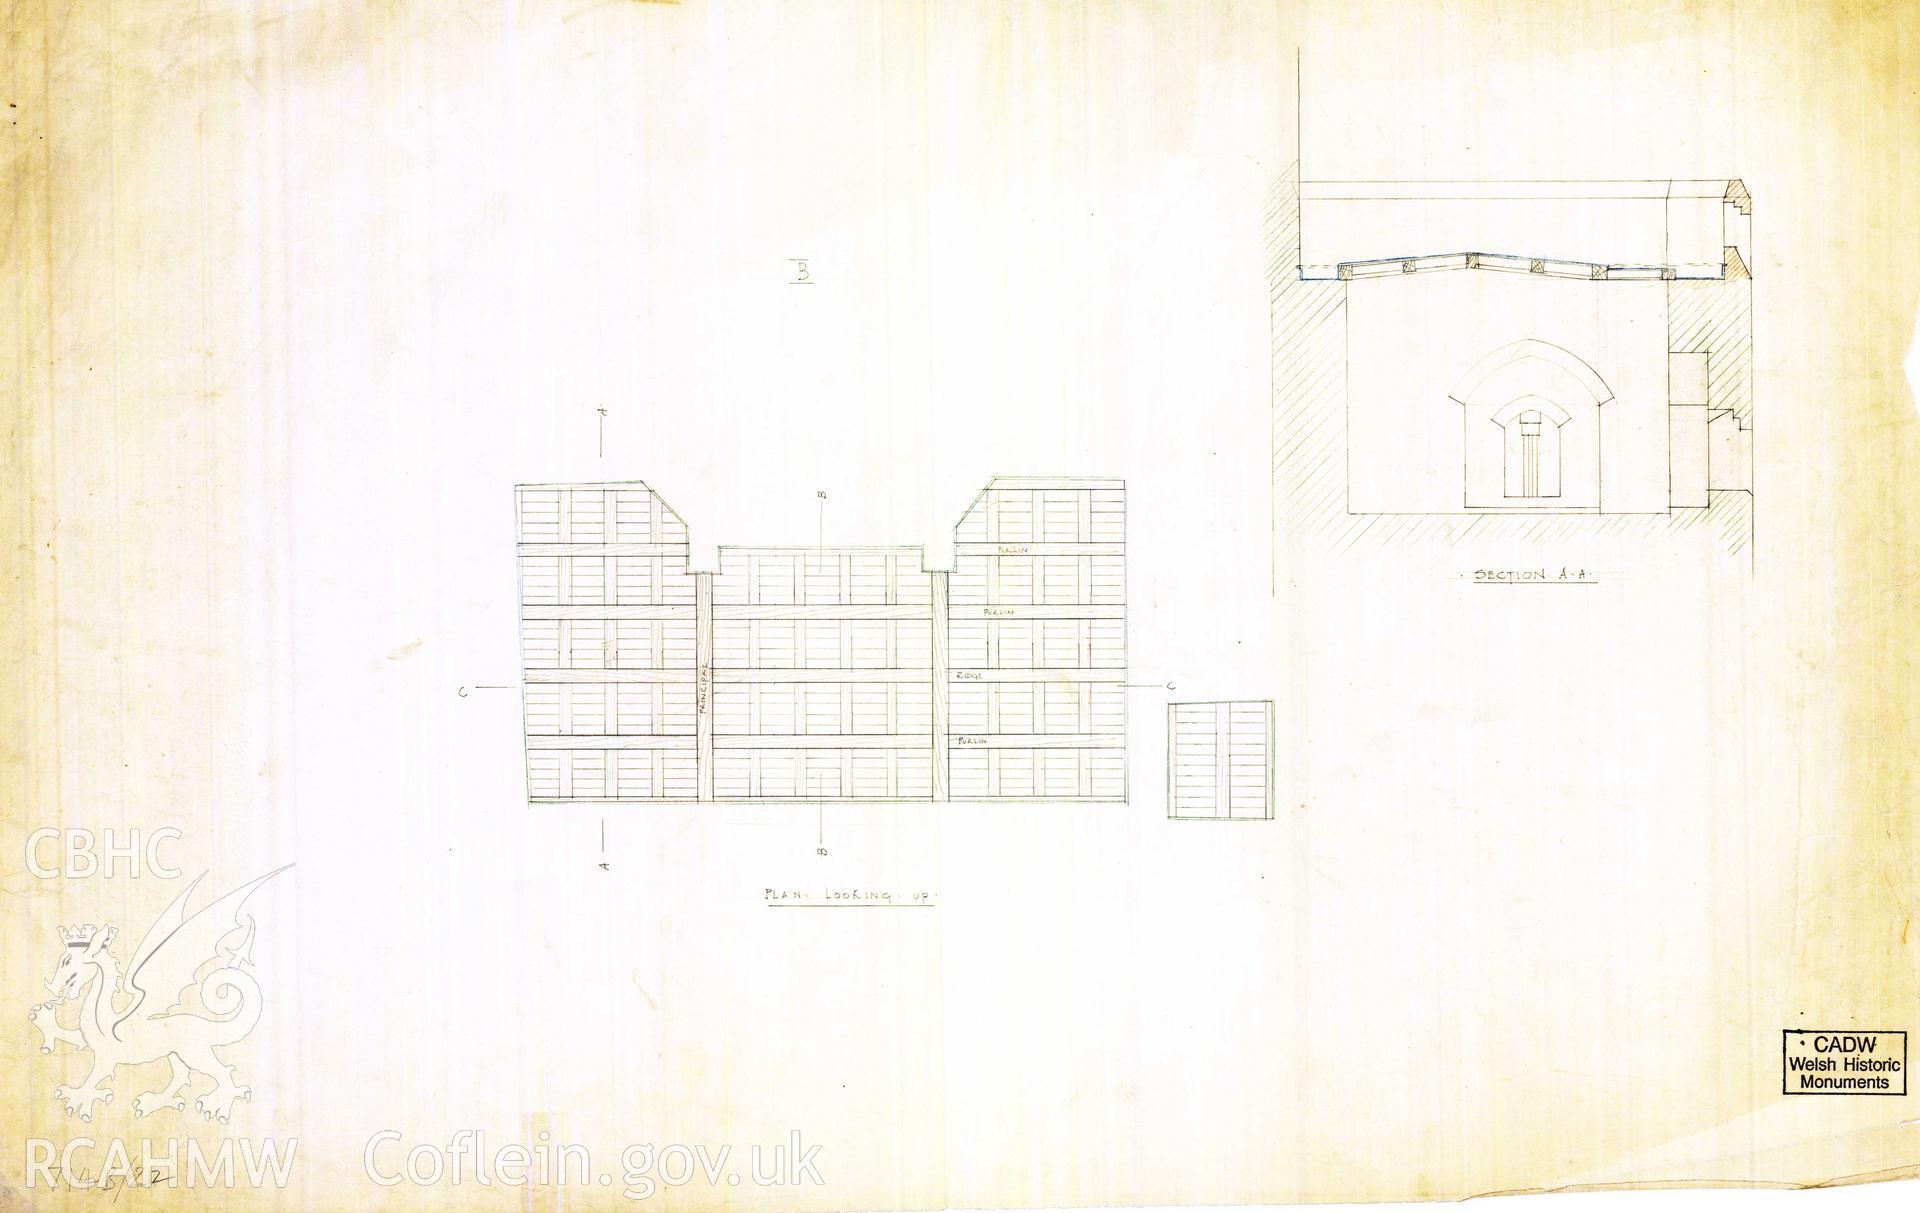 Digital copy of Cadw guardianship monument drawing of Caerphilly Castle. Outer E gate, roof beams plan (iii). Cadw ref. no: 714B/22. Scale 1:[48].  Original drawing withdrawn and returned to Cadw at their request.